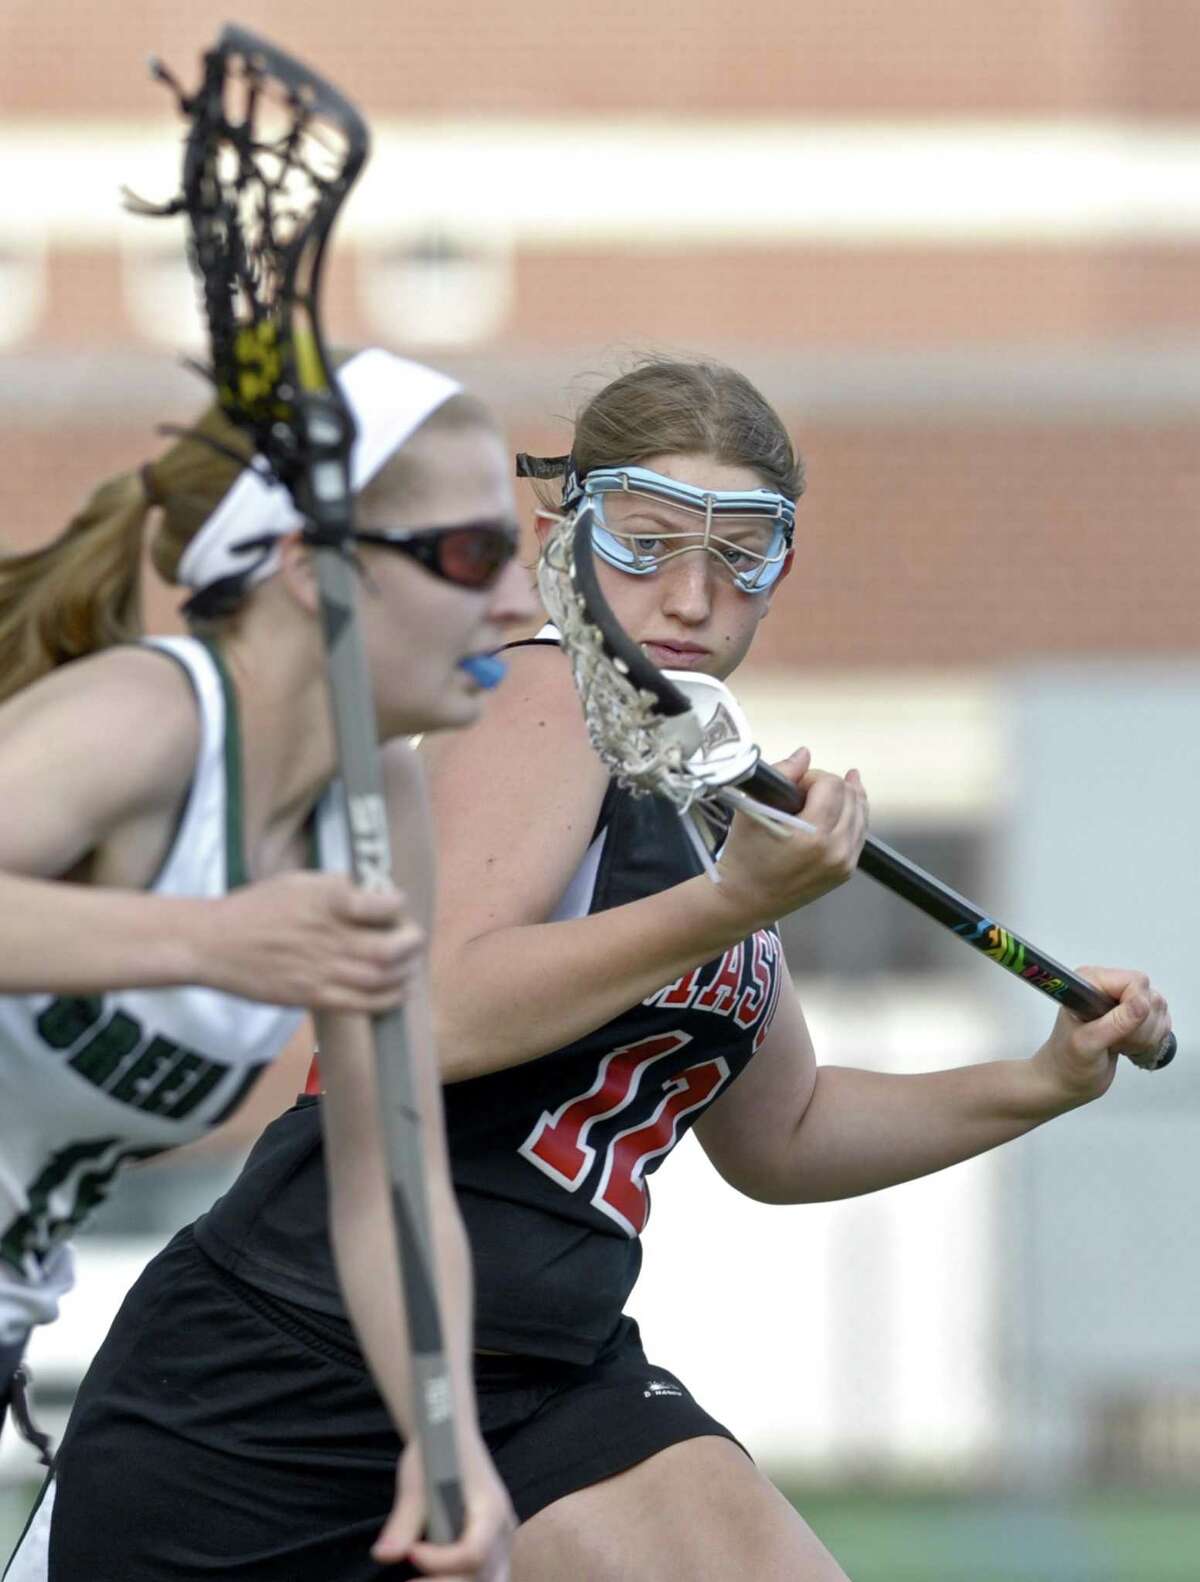 Masuk's Samantha Sebben (12) defends New Milford's Kelli Souza (18) as she races up field with the ball in the girls lacrosse game between Masuk and New Milford high schools, on Tuesday night, May 2, 2017, at New Milford High School, in New Milford, Conn.